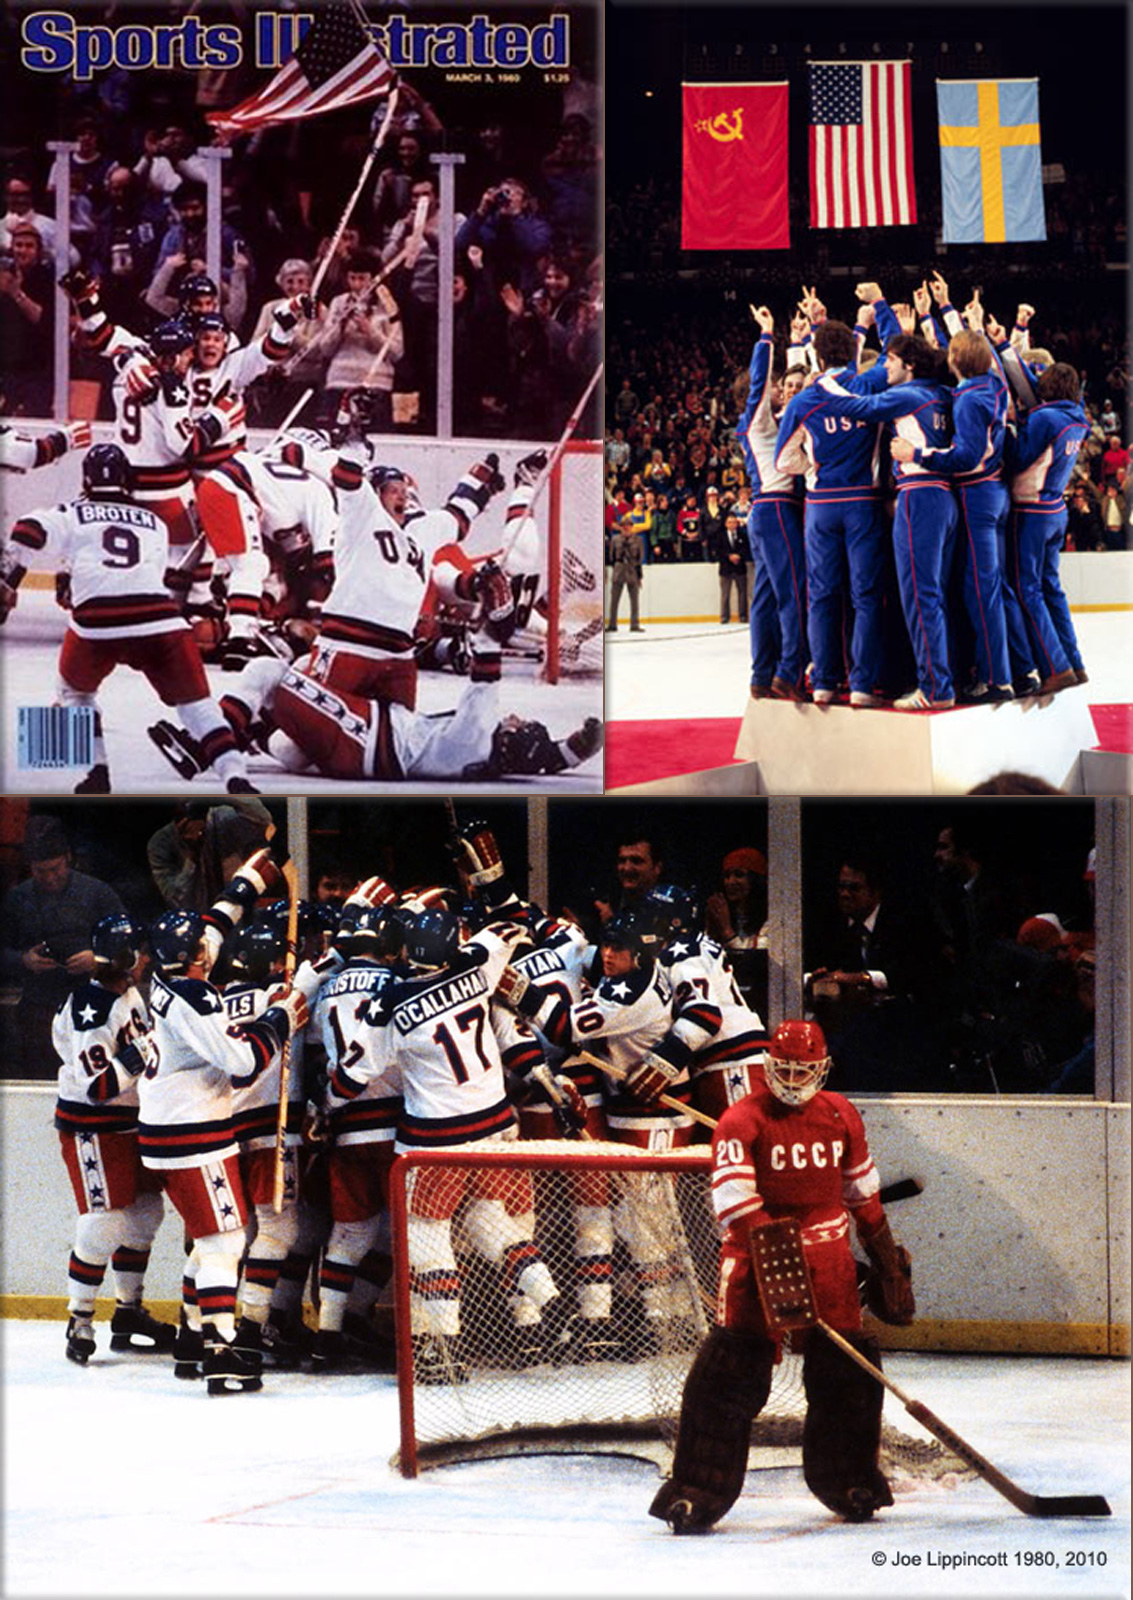 Miracle on Ice: 1980 Winter Olympics at Lake Placid, New York; The March 3, 1980 cover of Sports Illustrated ran without any accompanying captions or headlines ● The U.S. Olympic Hockey Team Defeated the heavy favored, four time Olympic Gold winning Soviet Union Hockey Team in the XIII Winter Olympics